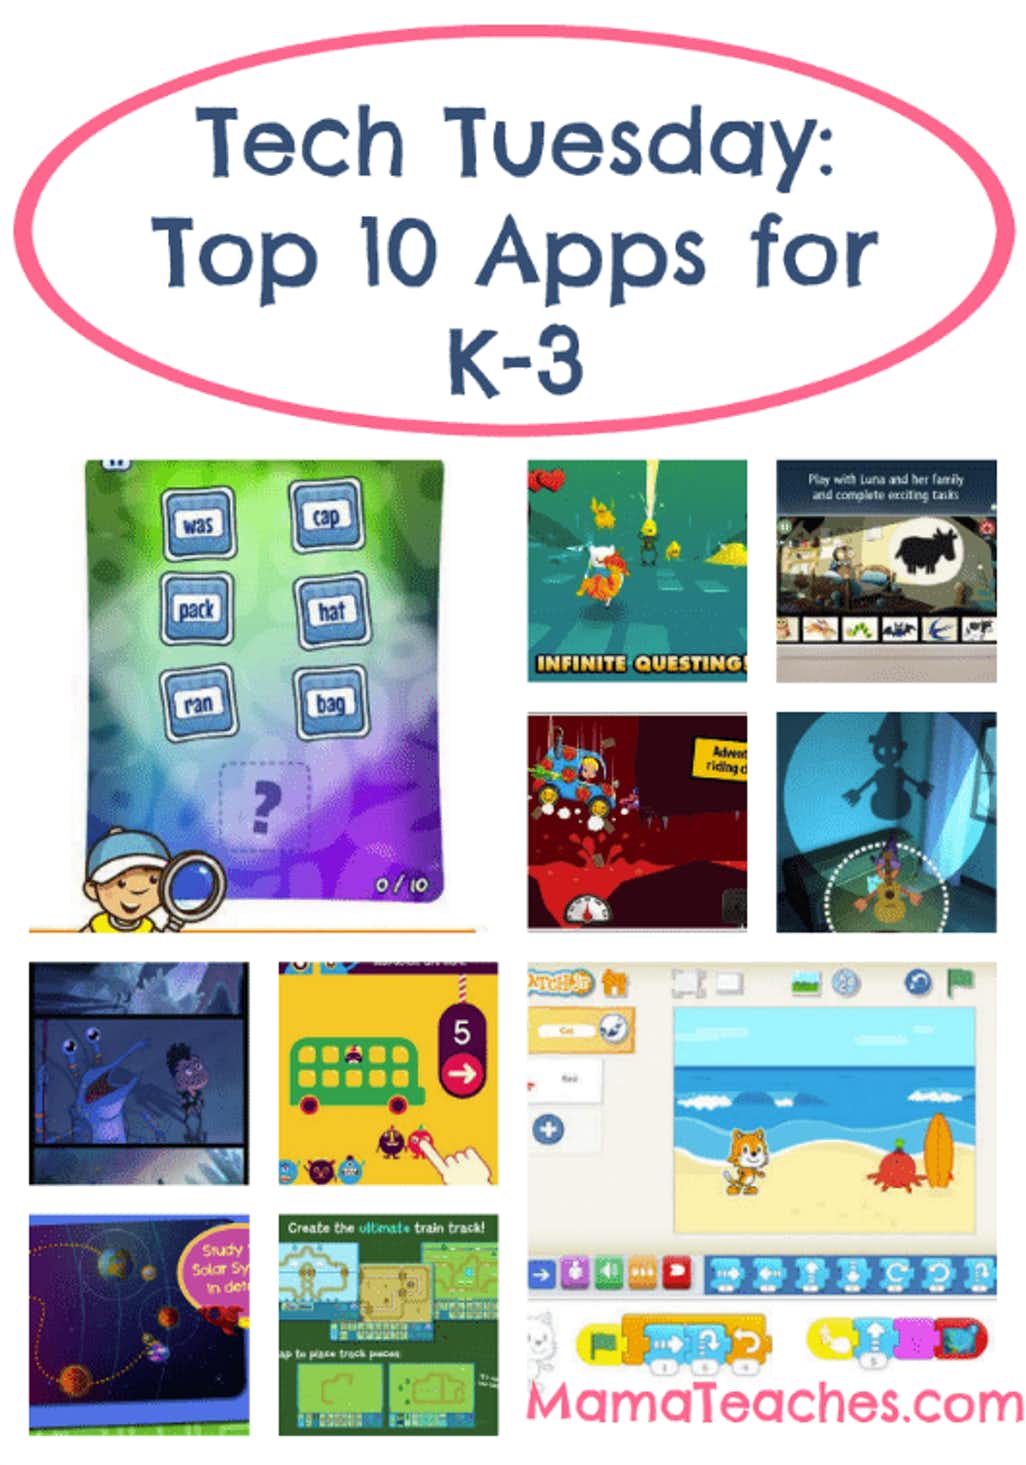 Top 10 Apps for K-3